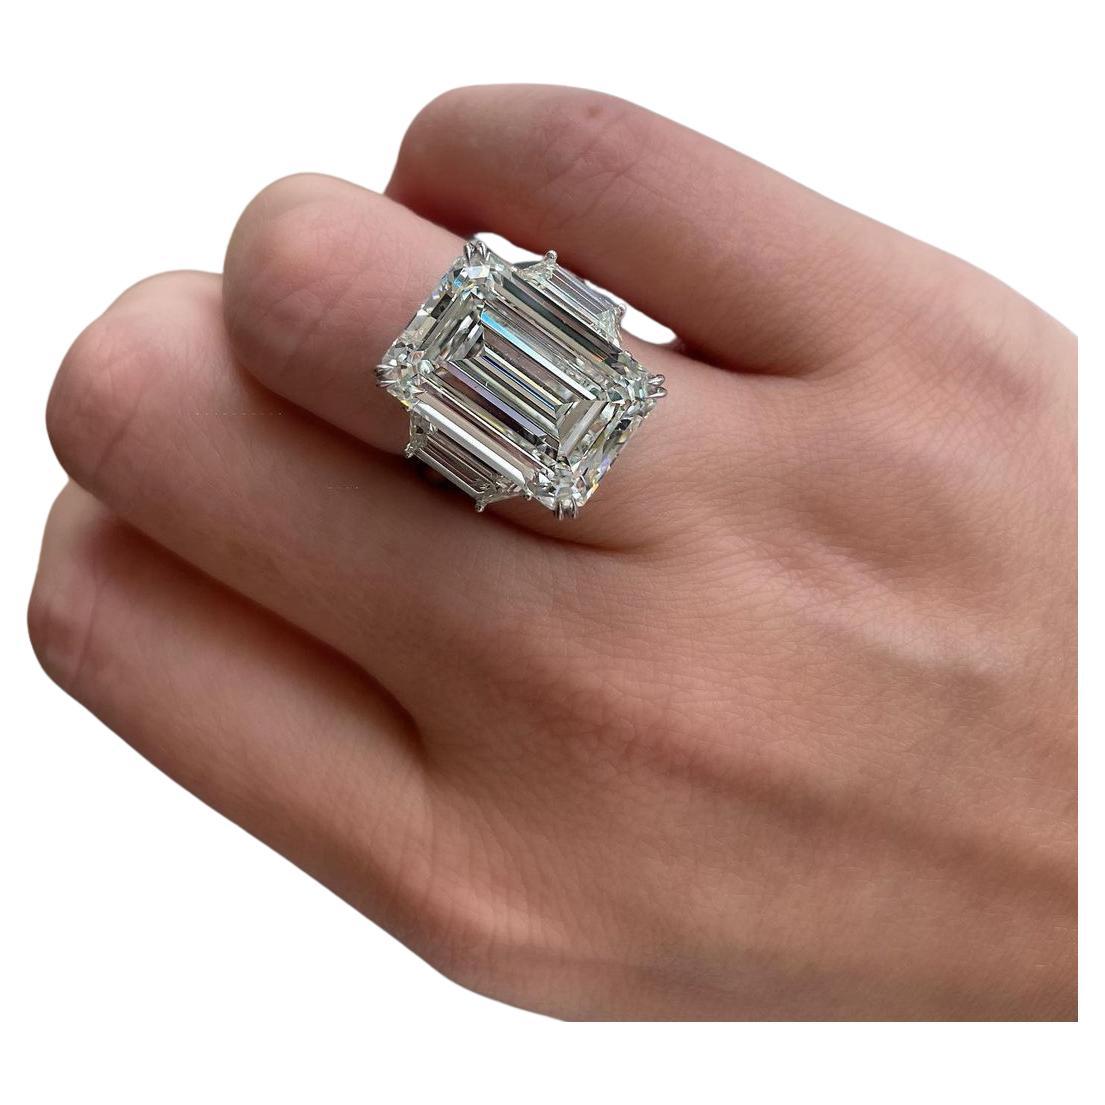 EXCEPTIONAL GIA Certified 10 Carat Emerald Cut Diamond Ring